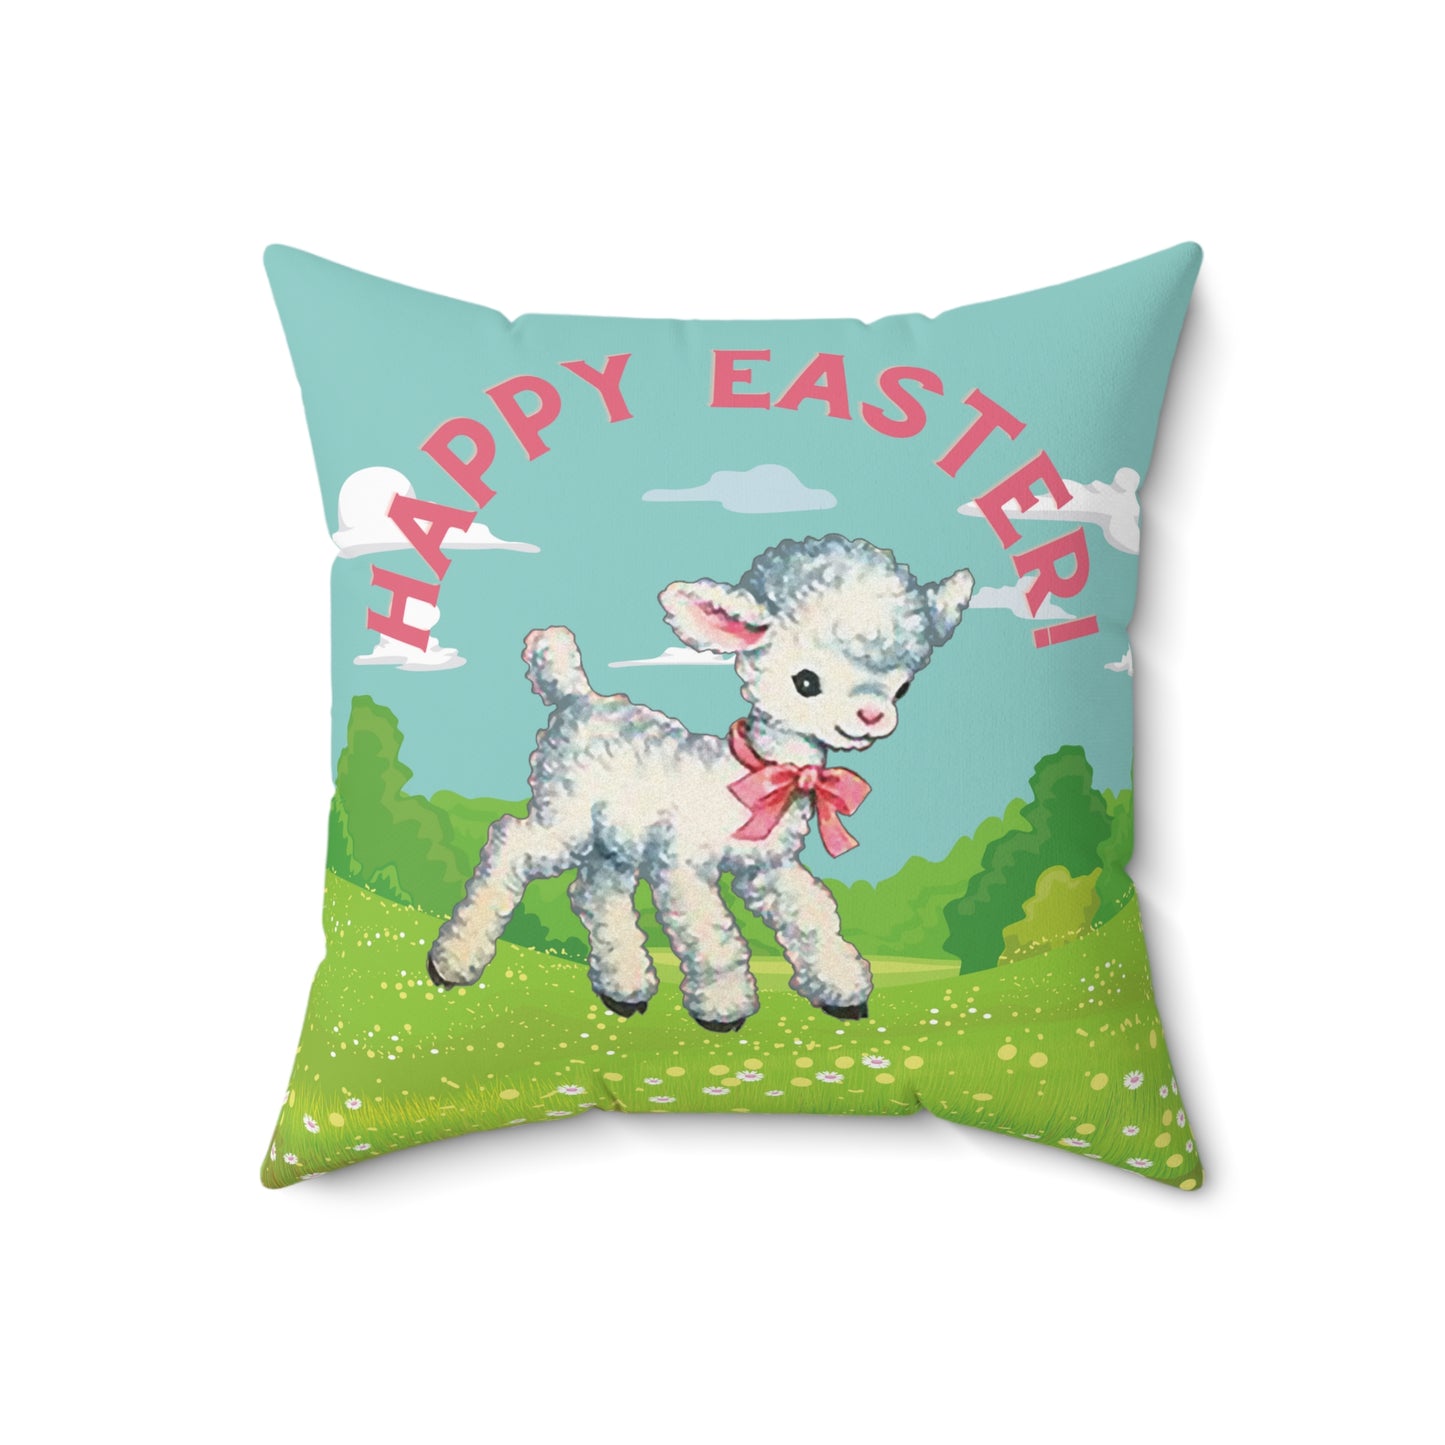 Retro Easter Lamb, Vintage Mid Century Mod Inspired Colorful Happy Easter Accent Throw Pillow